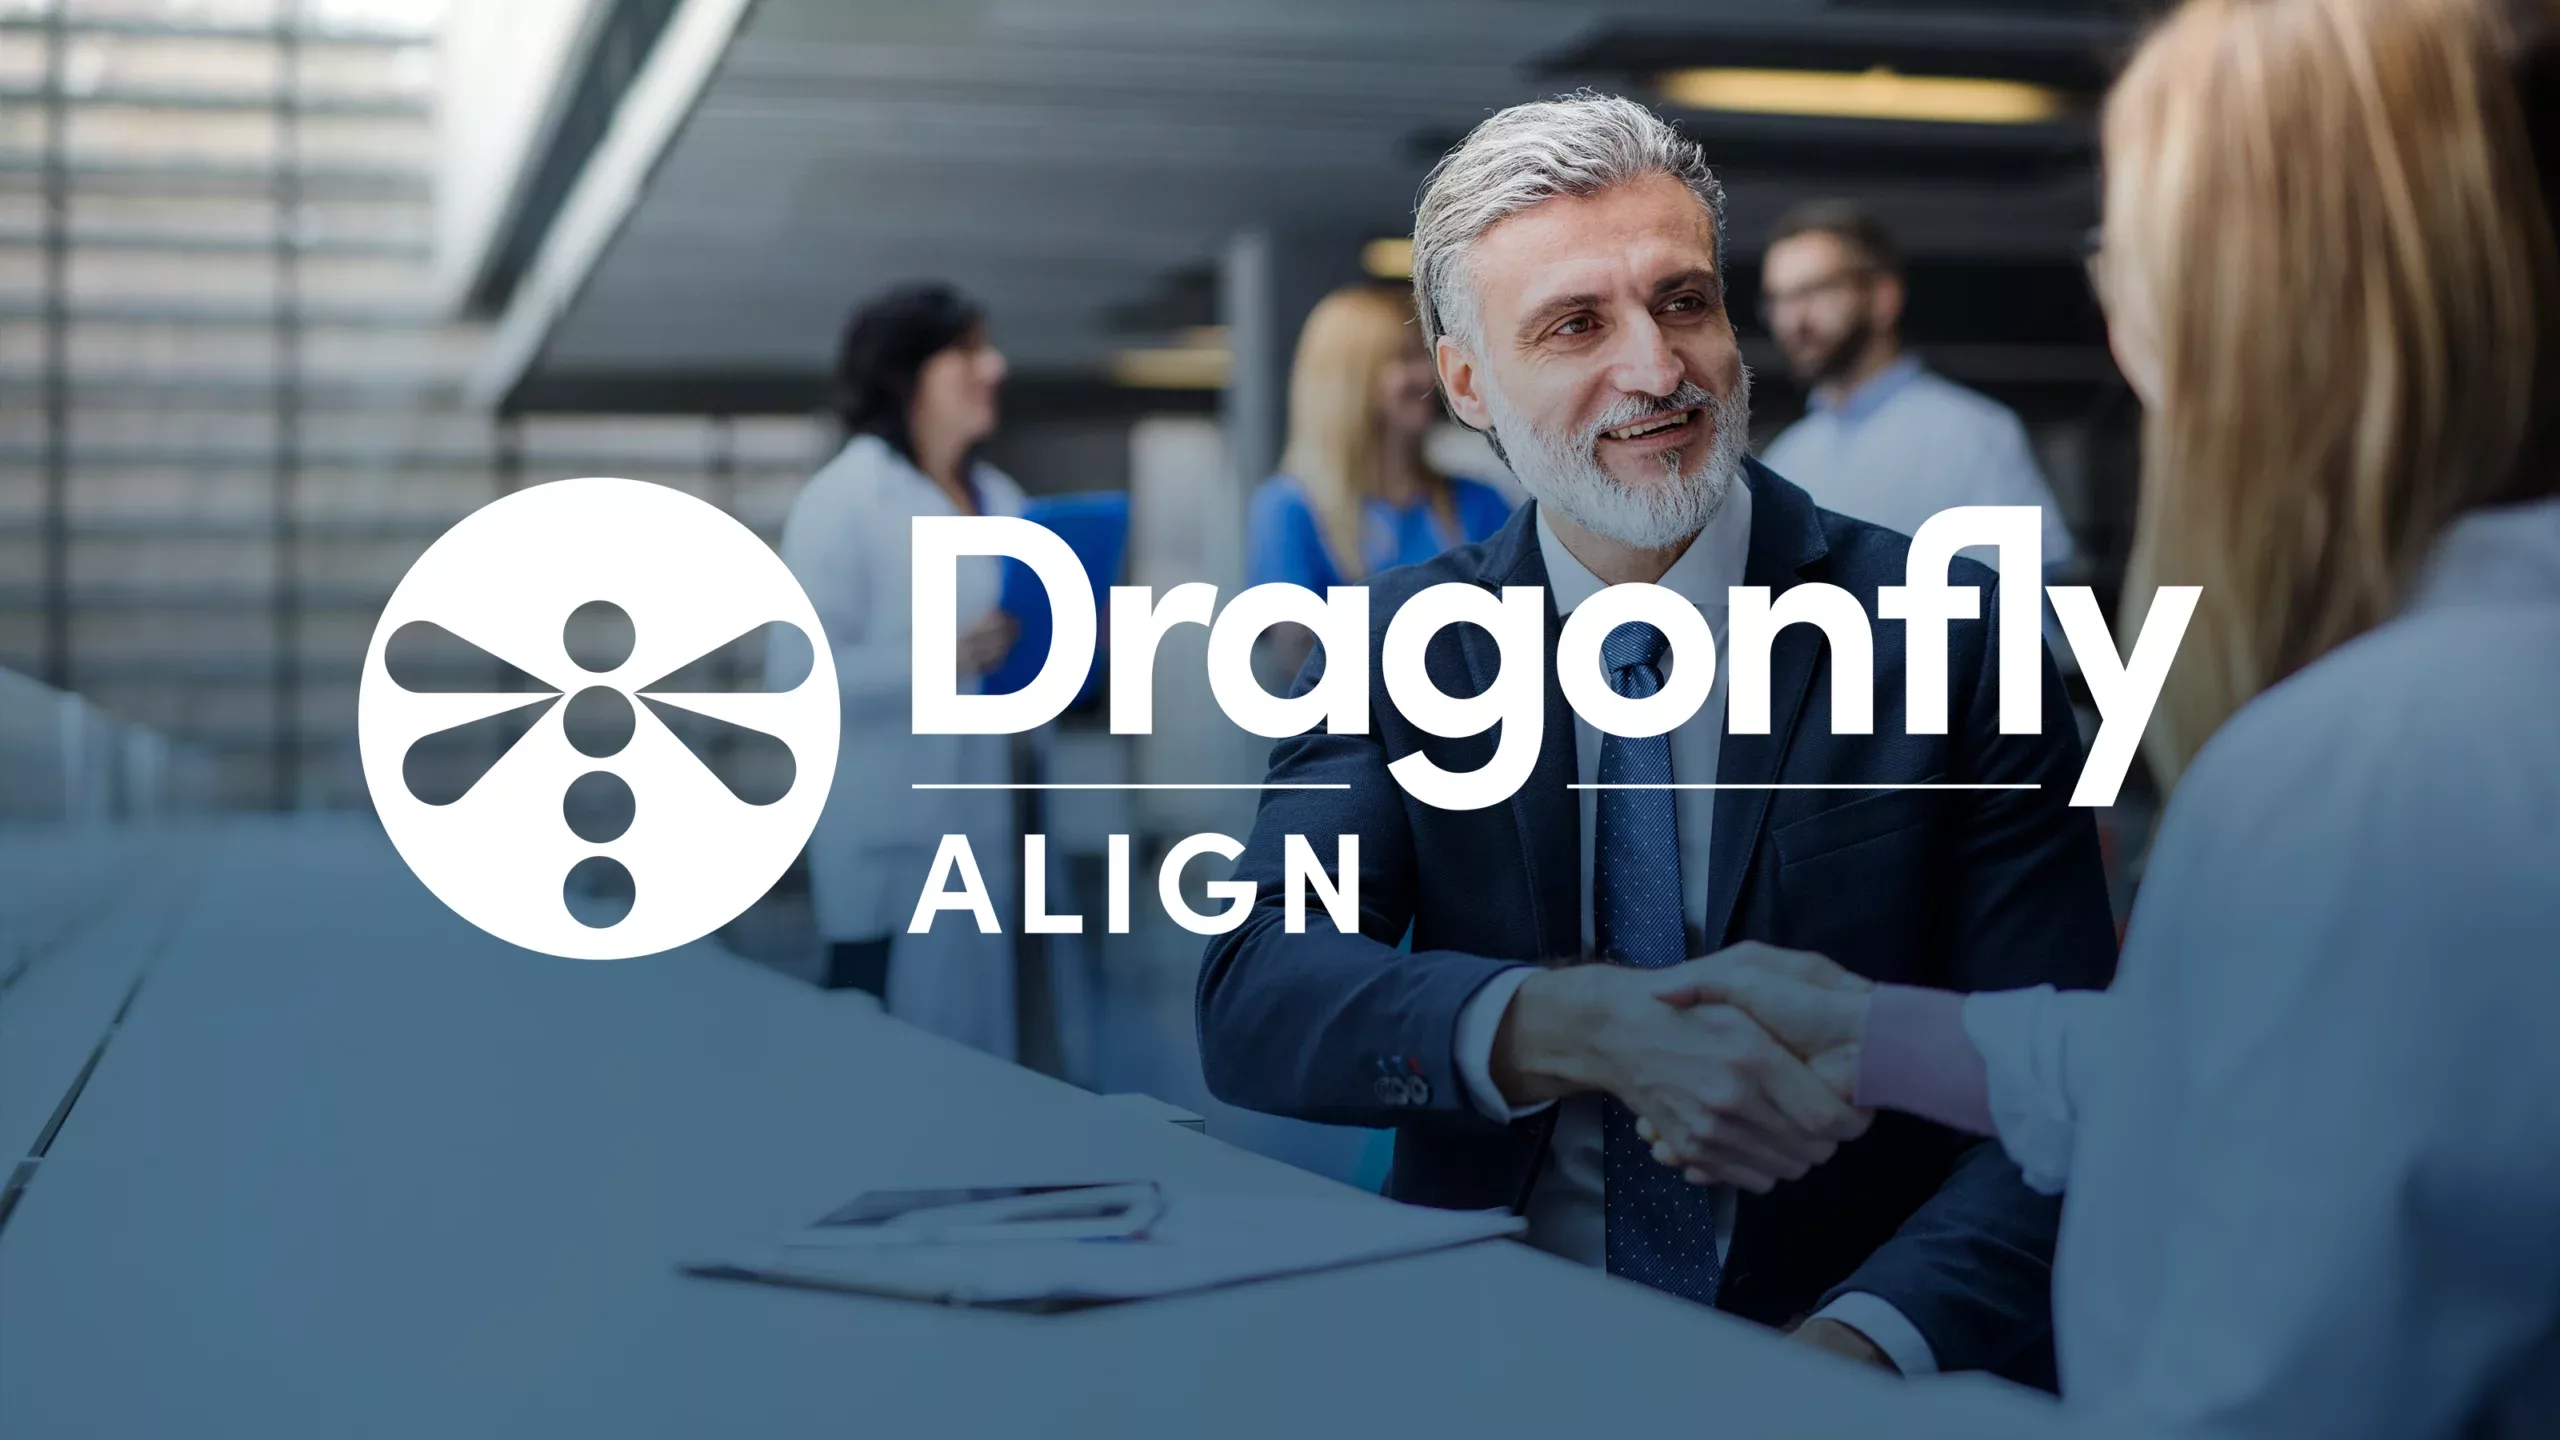 Dragonfly Align Logo above man and woman shaking hands